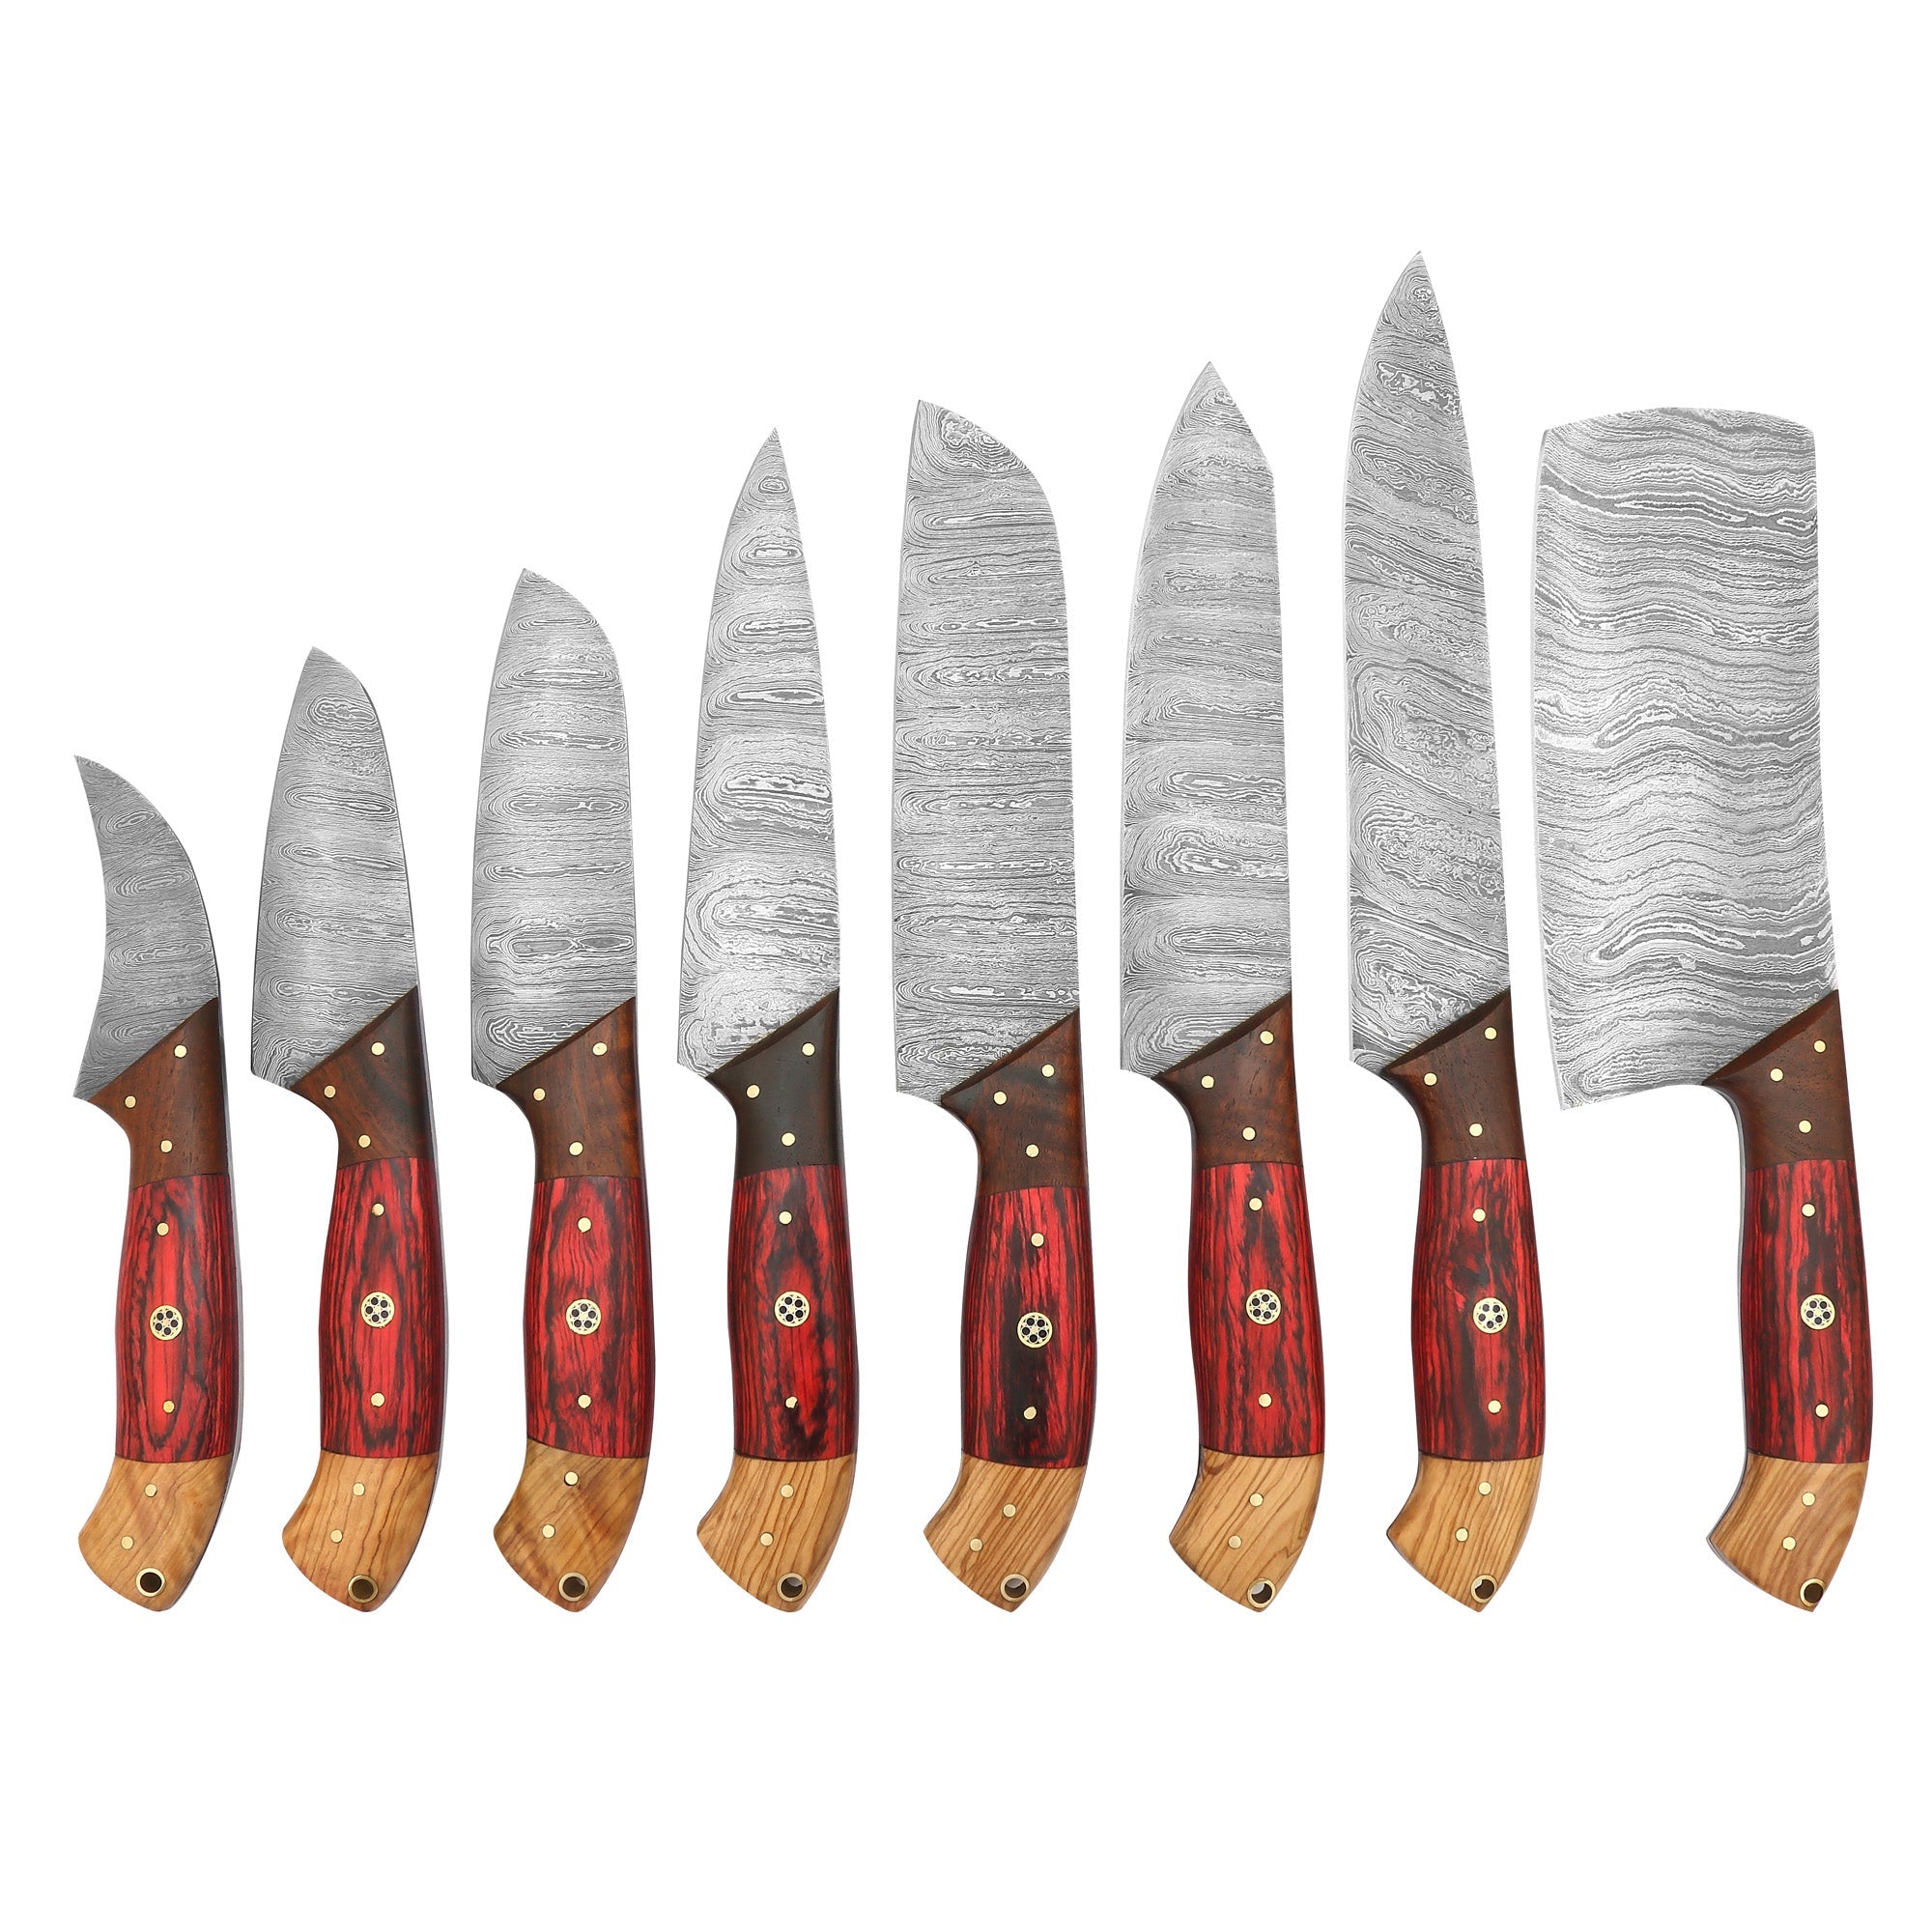 W Trading- Damascus Steel Professional Kitchen Knife Set, Hand Forge  Damascus Chef Knives Set 8 pcs Butcher Cleaver Knives with Leather Case  Bag.